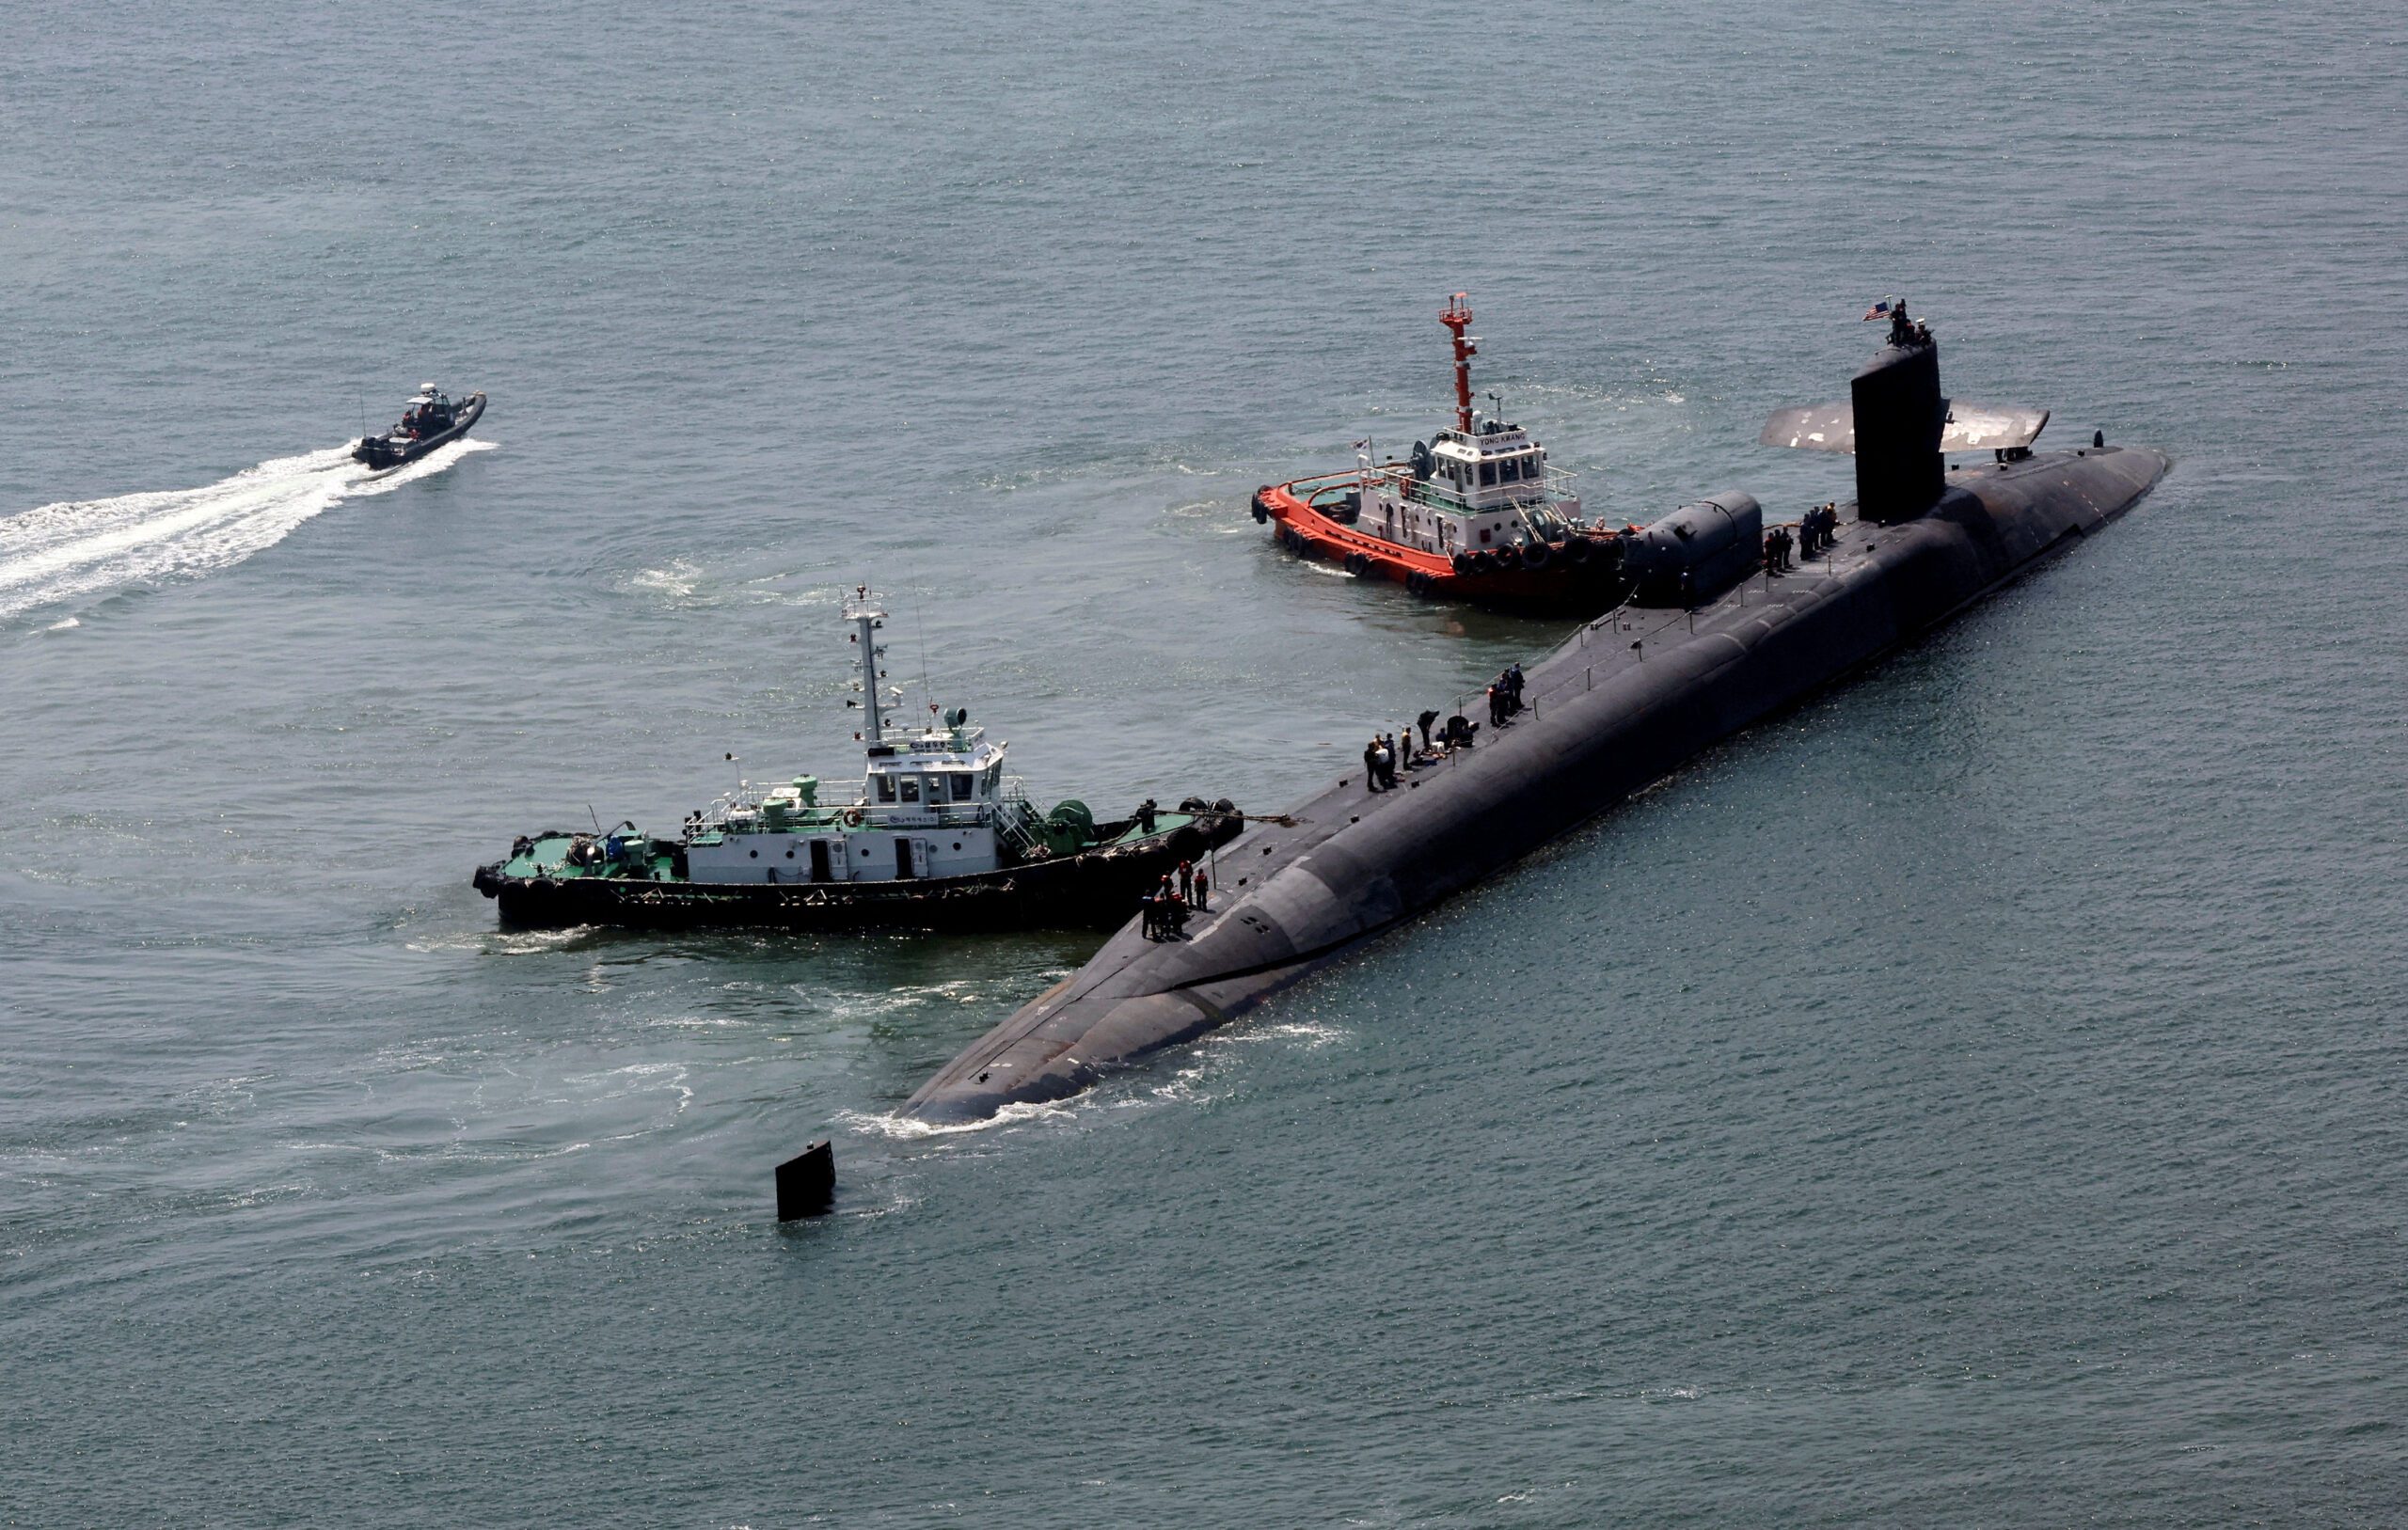 Ohio-class U.S. nuclear-powered submarine USS Michigan (SSGN 727) arrives at a port in Busan, South Korea, June 16, 2023. Yonhap via REUTERS